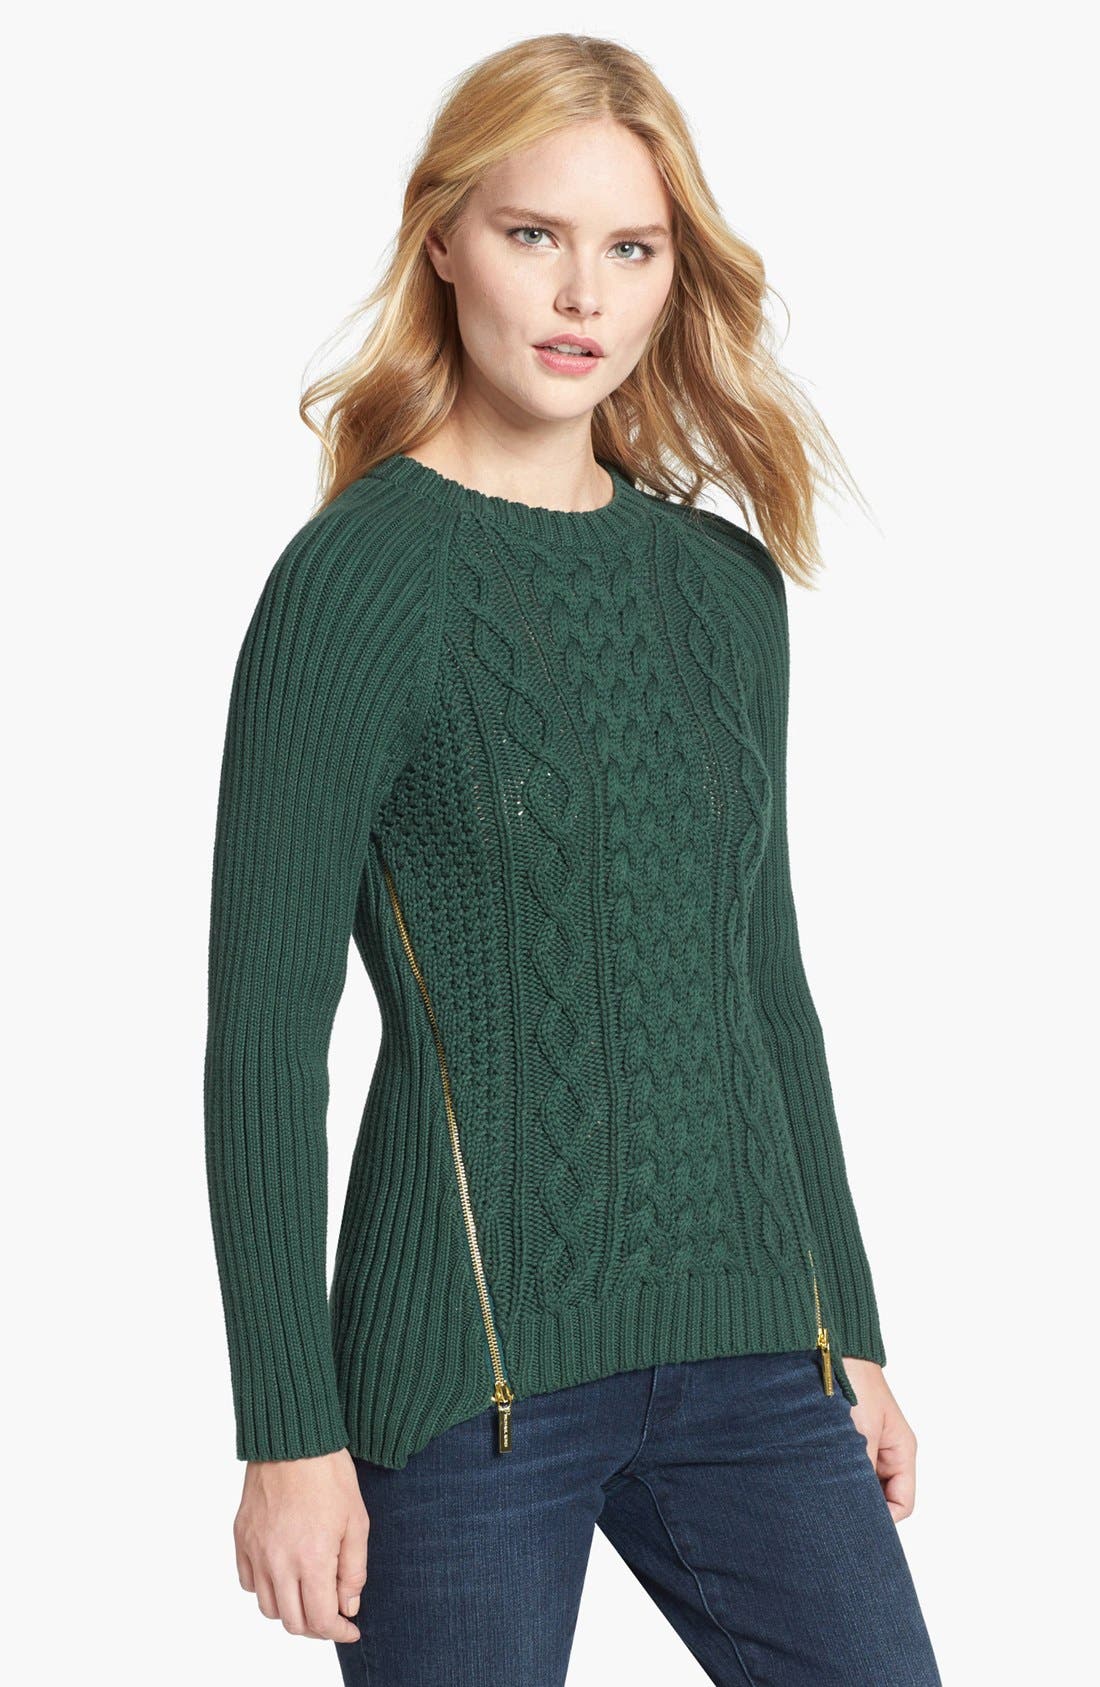 michael kors sweater with side zippers